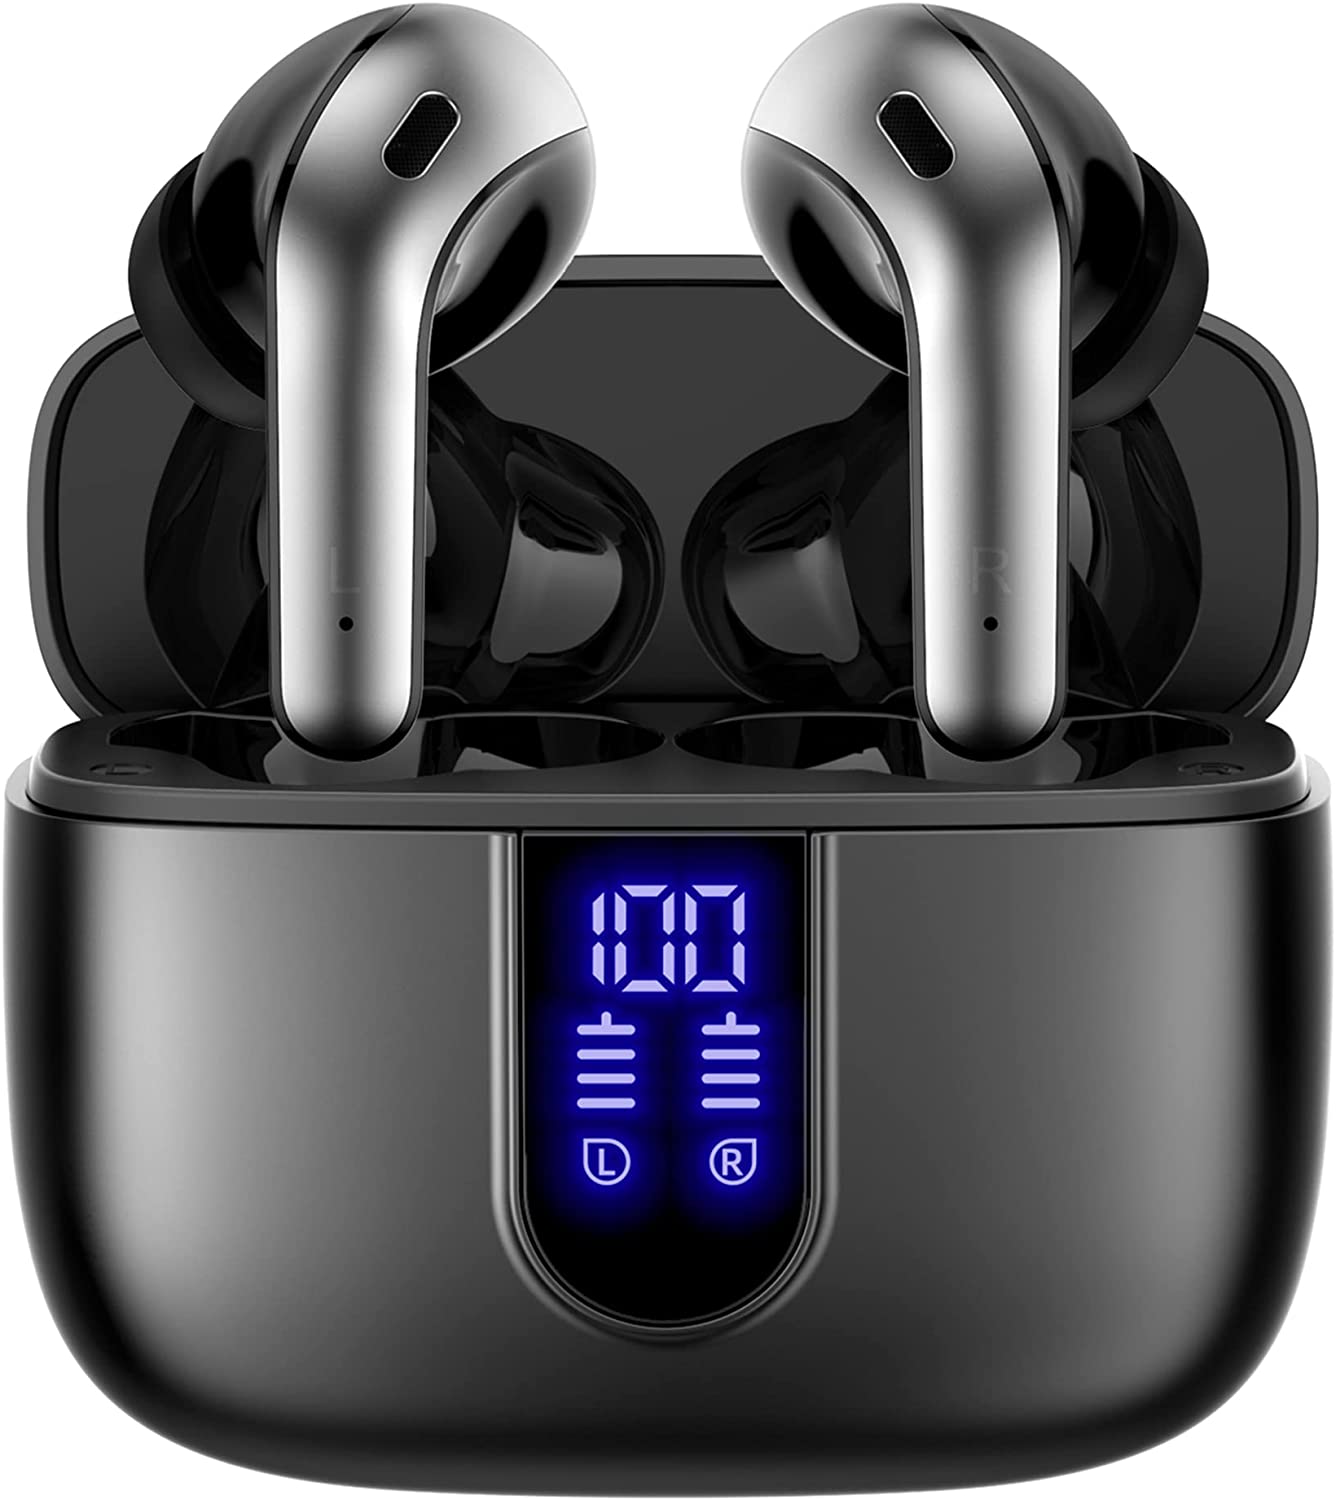 TAGRY Bluetooth Headphones True Wireless Earbuds 60H Playback LED Power Display Earphones with Wireless Charging Case IPX5 Waterproof in-Ear Earbuds with Mic for TV Smart Watch Computer Laptop Sports